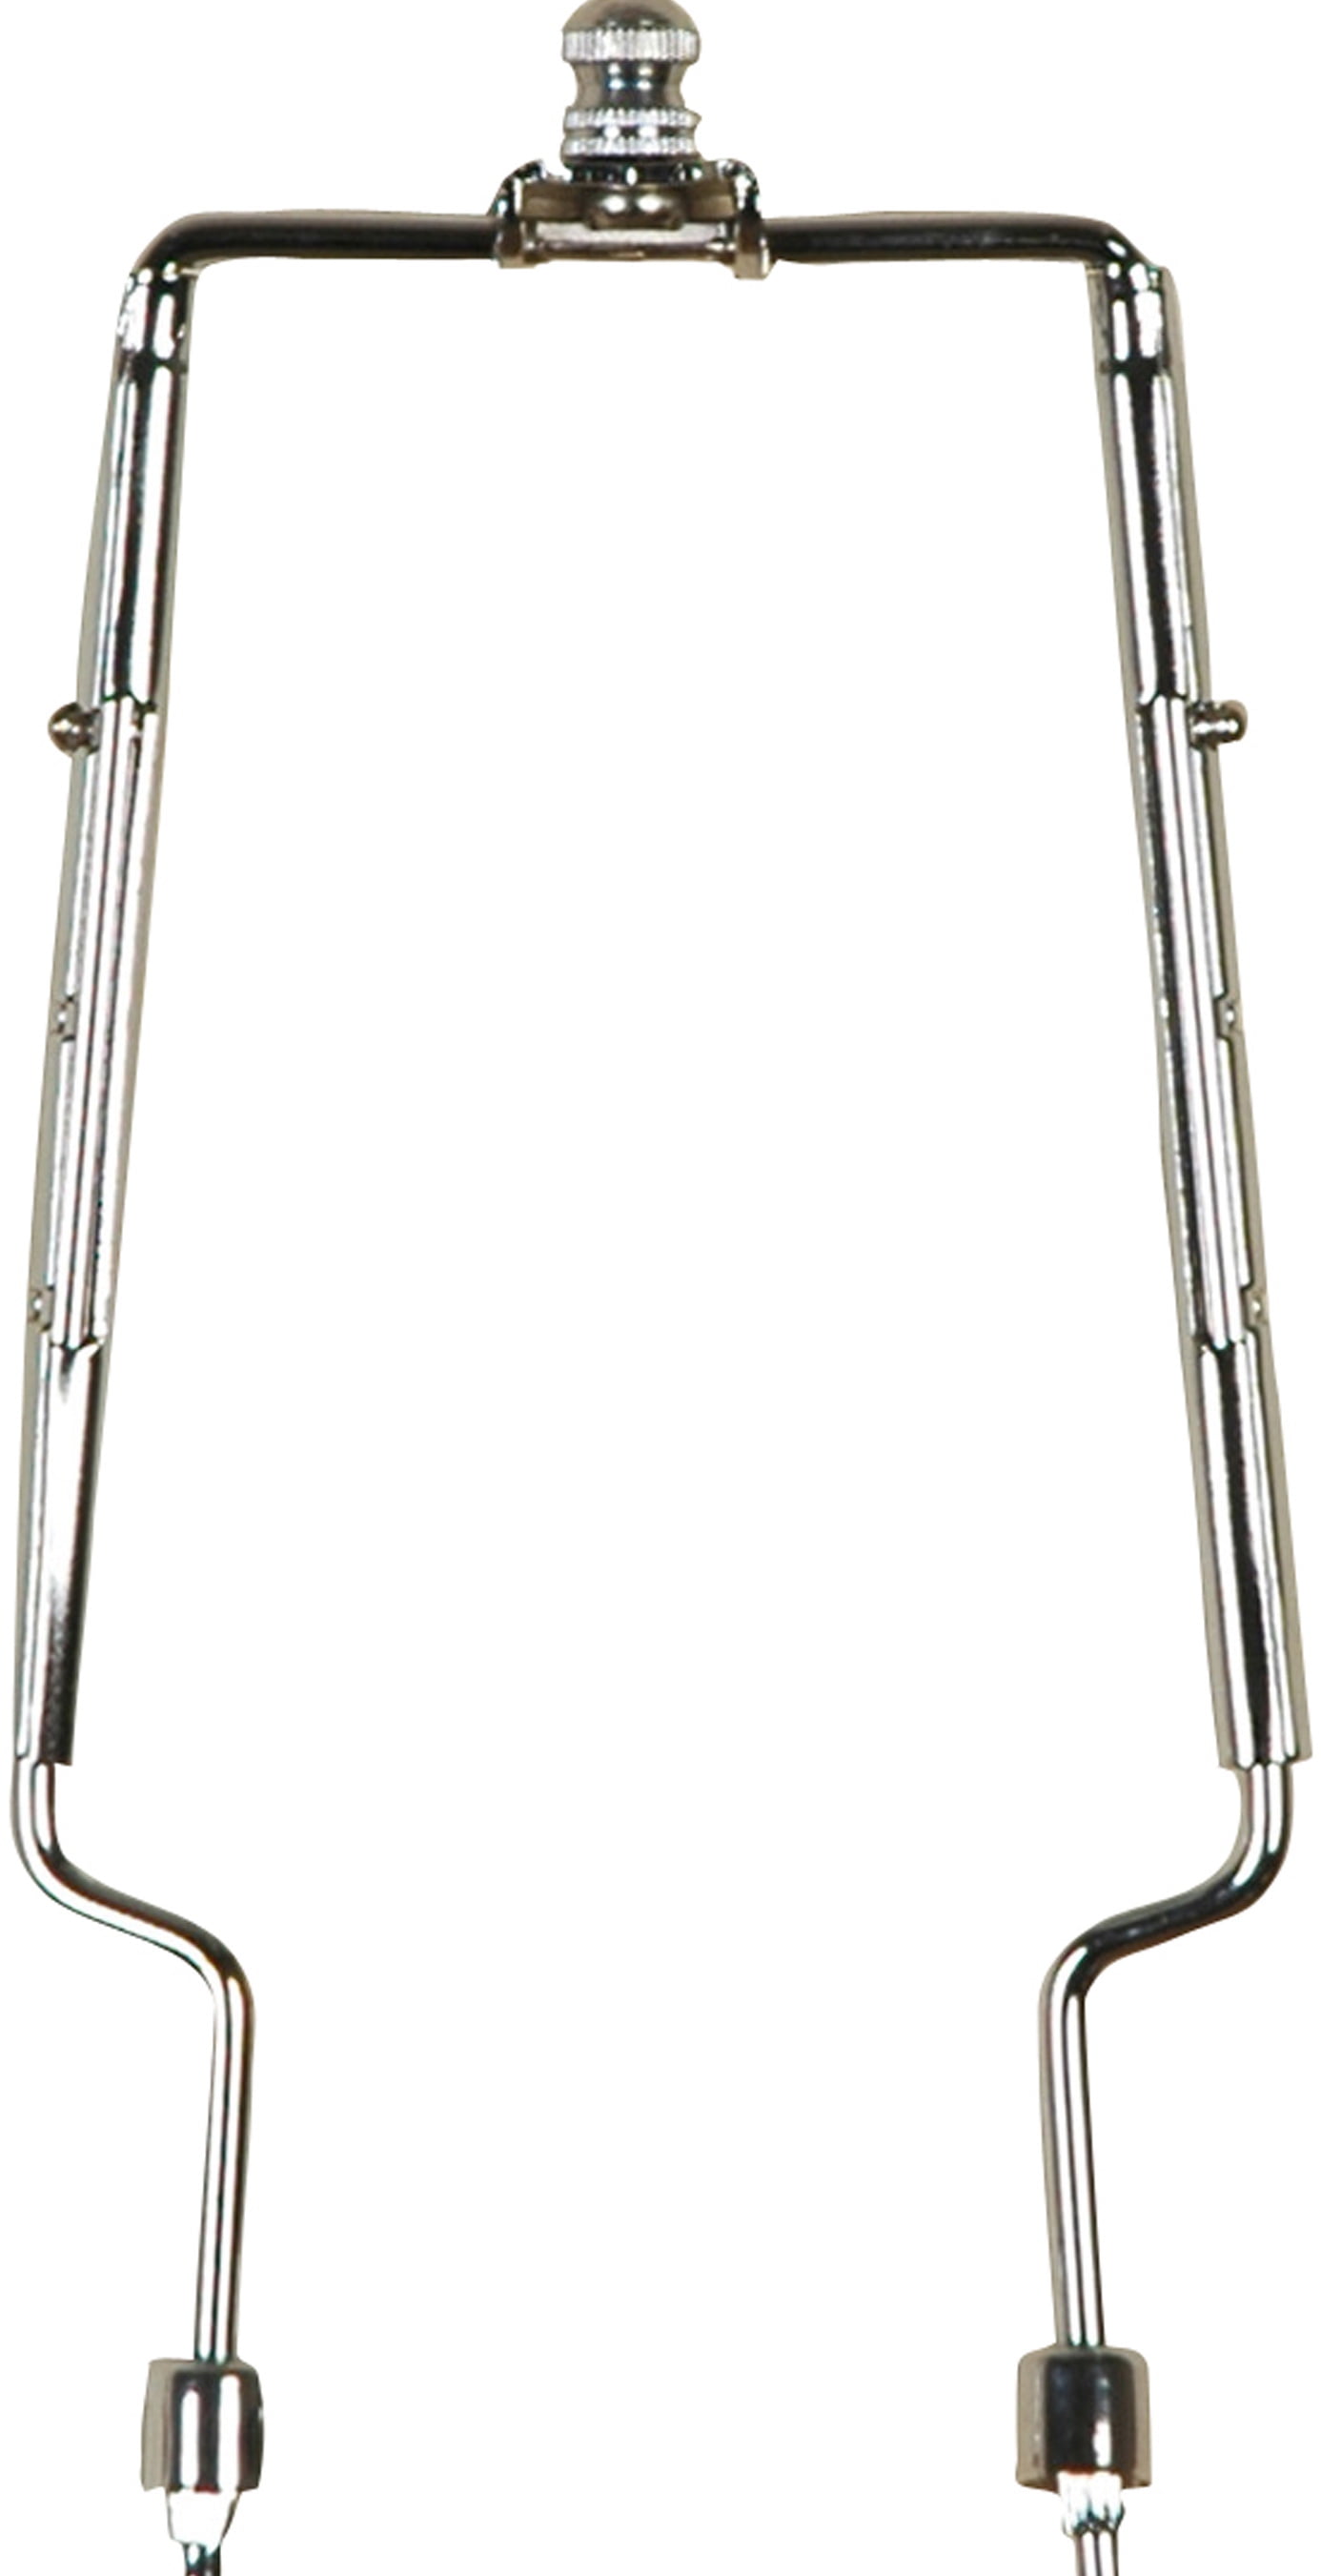 Details about   Threshold Adjustable Harp Chrome Finish 8-12" Tall 